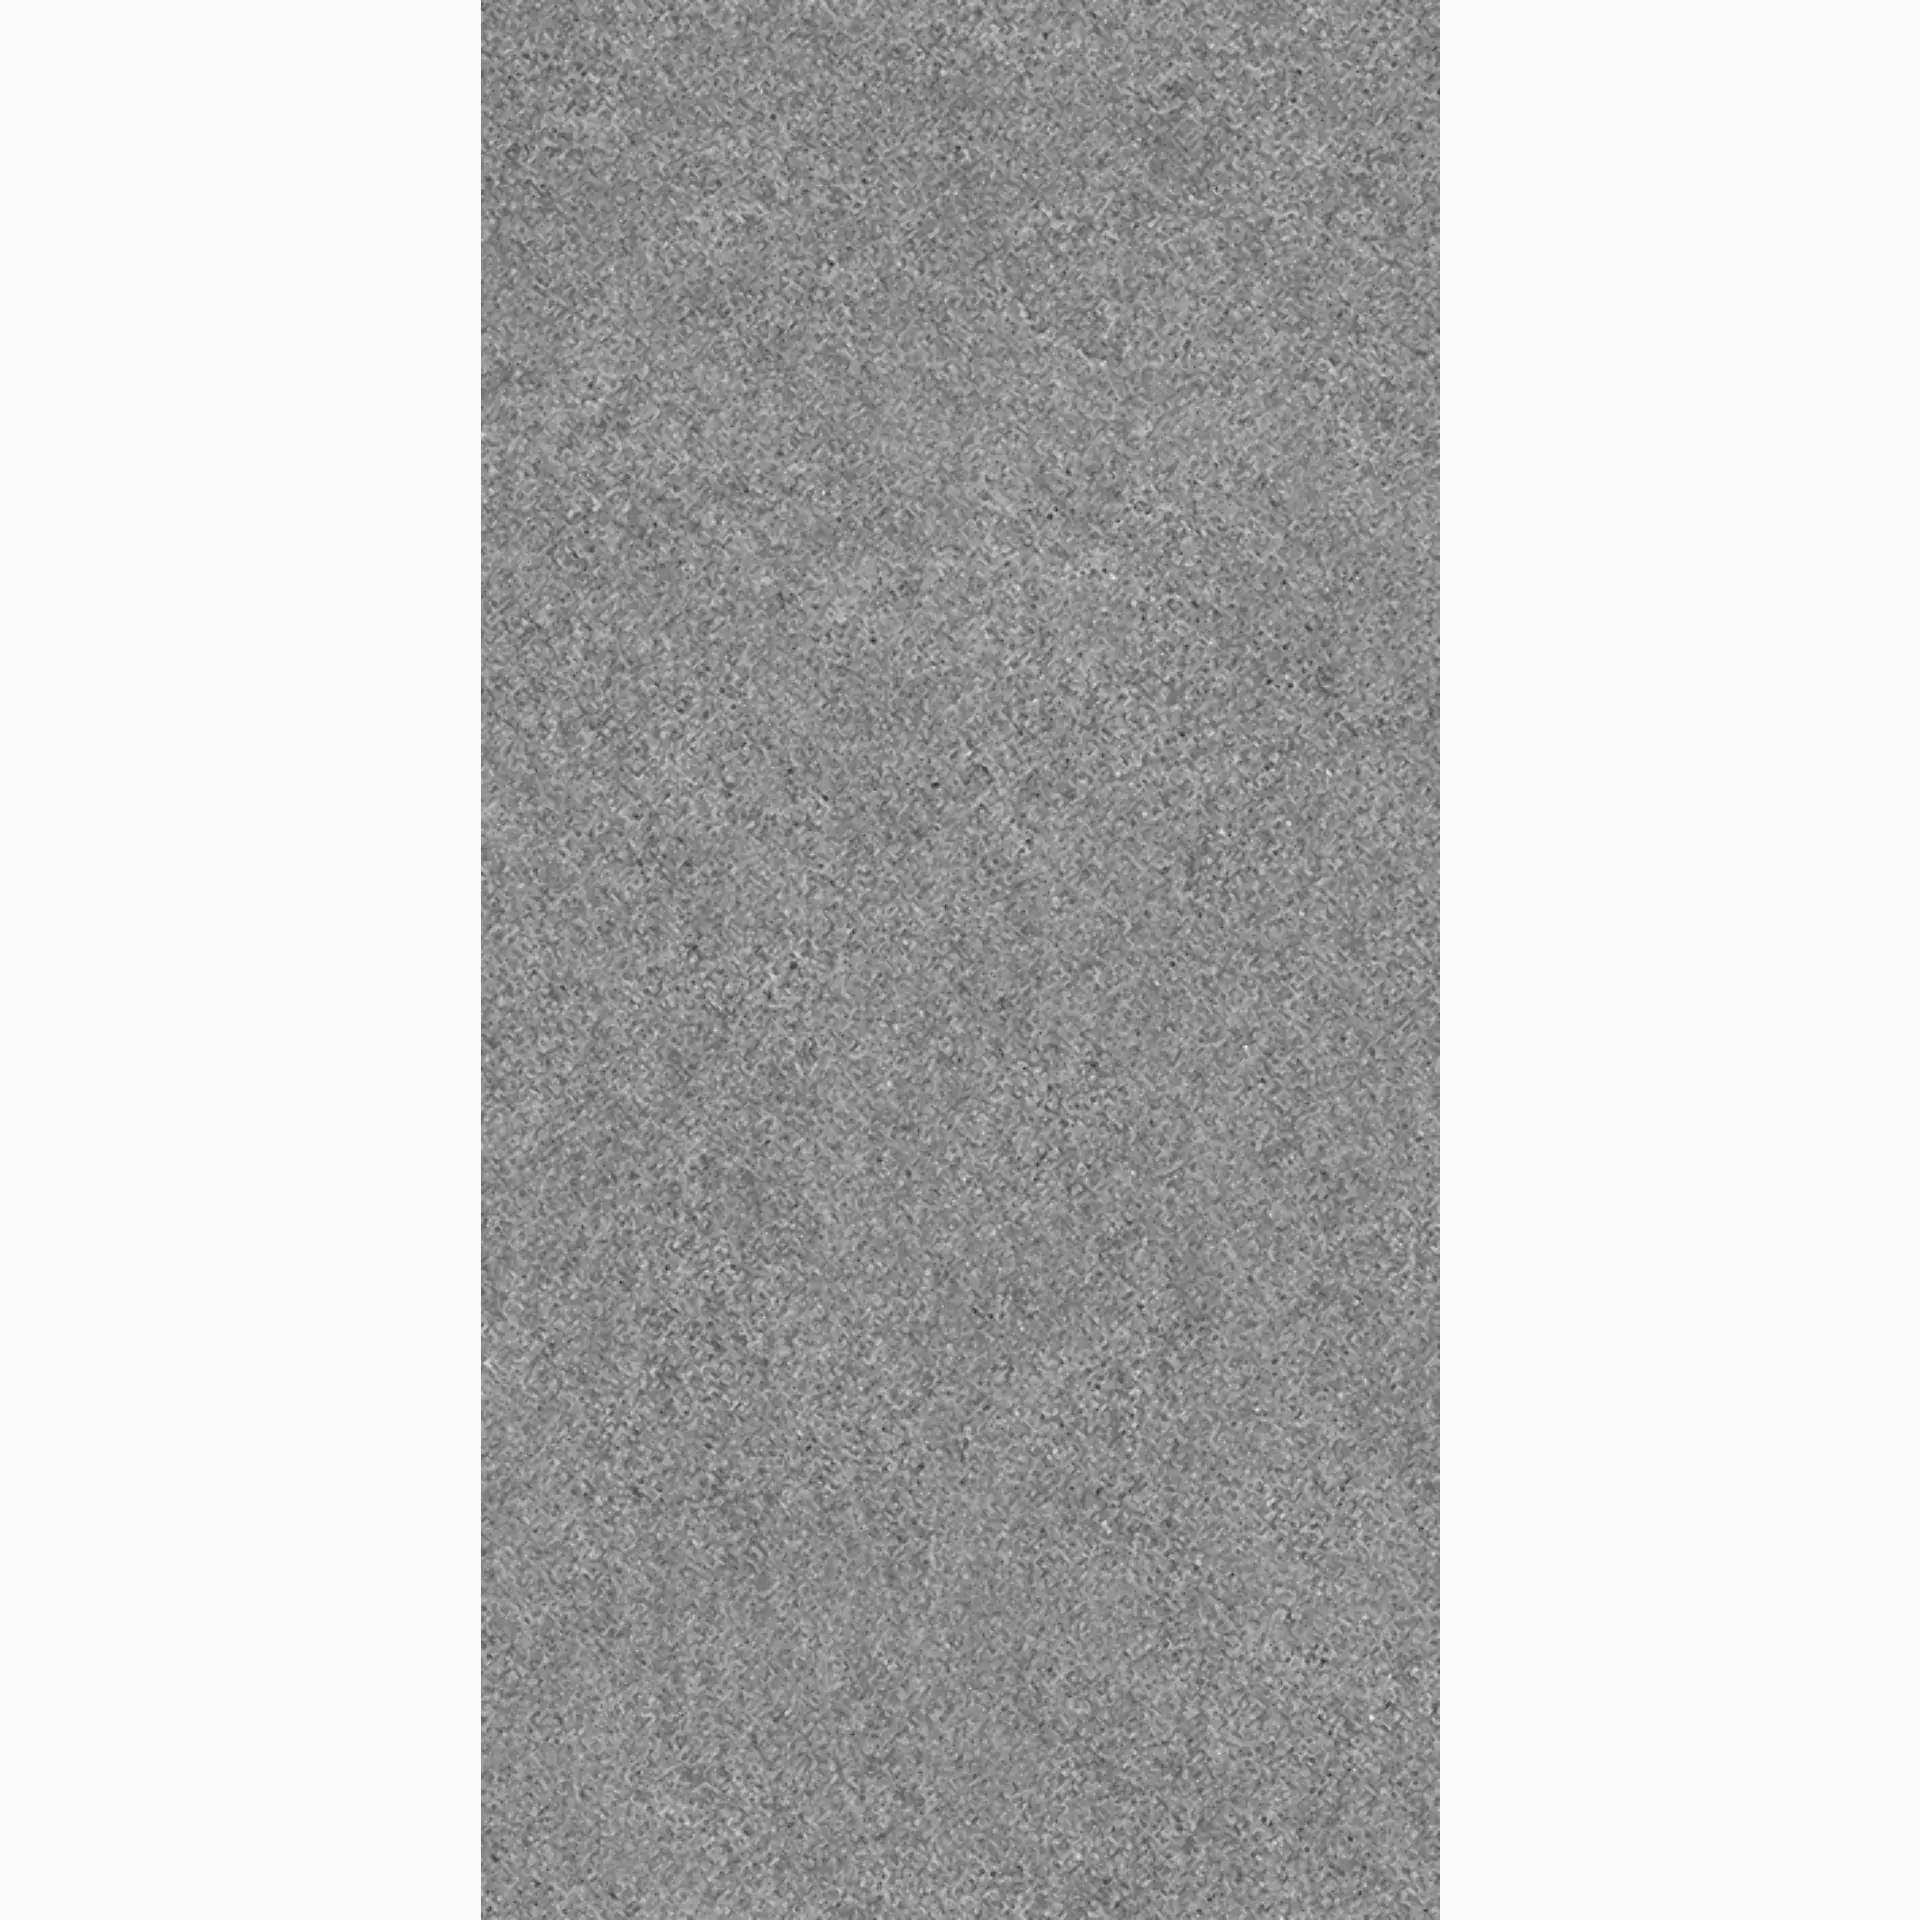 Villeroy & Boch Solid Tones Pure Stone Antislip 2521-PS61 30x60cm rectified 10mm